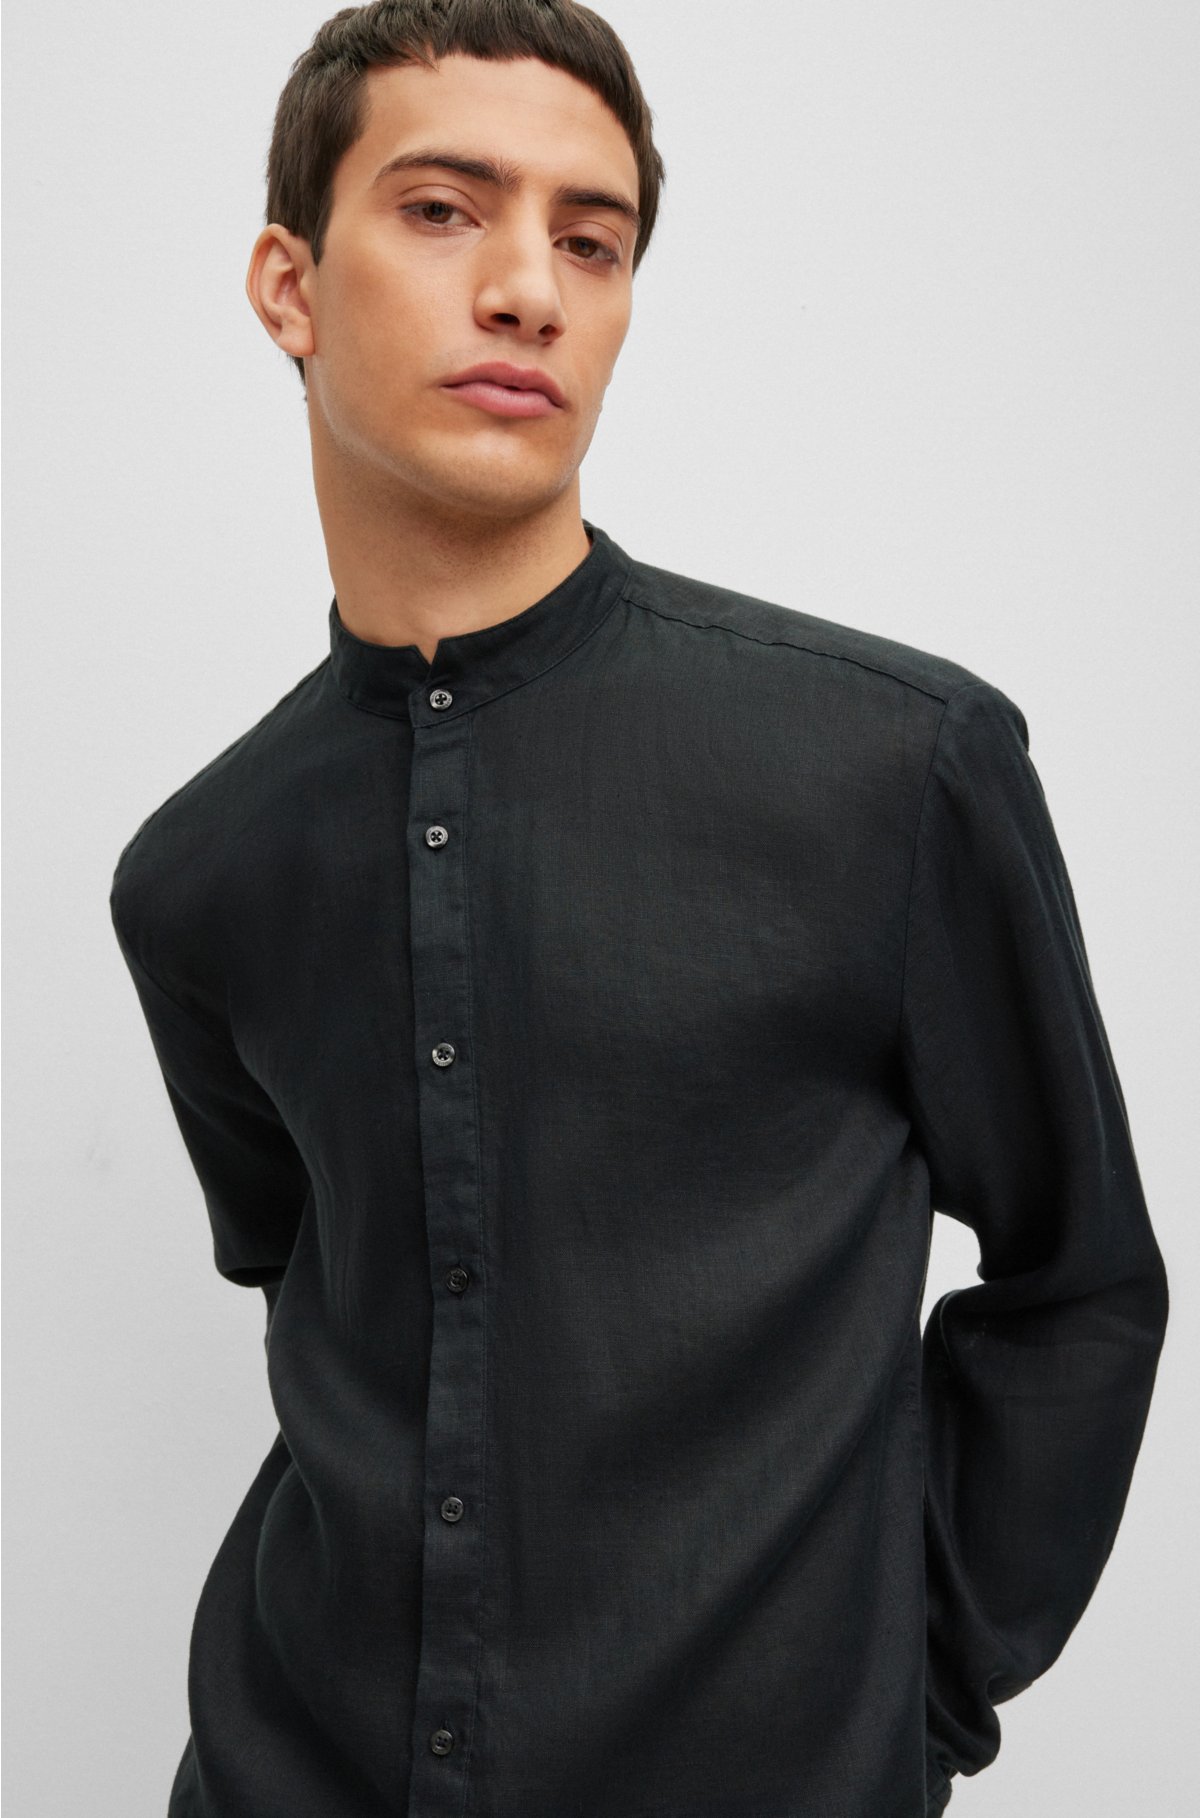 HUGO - Collarless slim-fit shirt in linen with stand collar